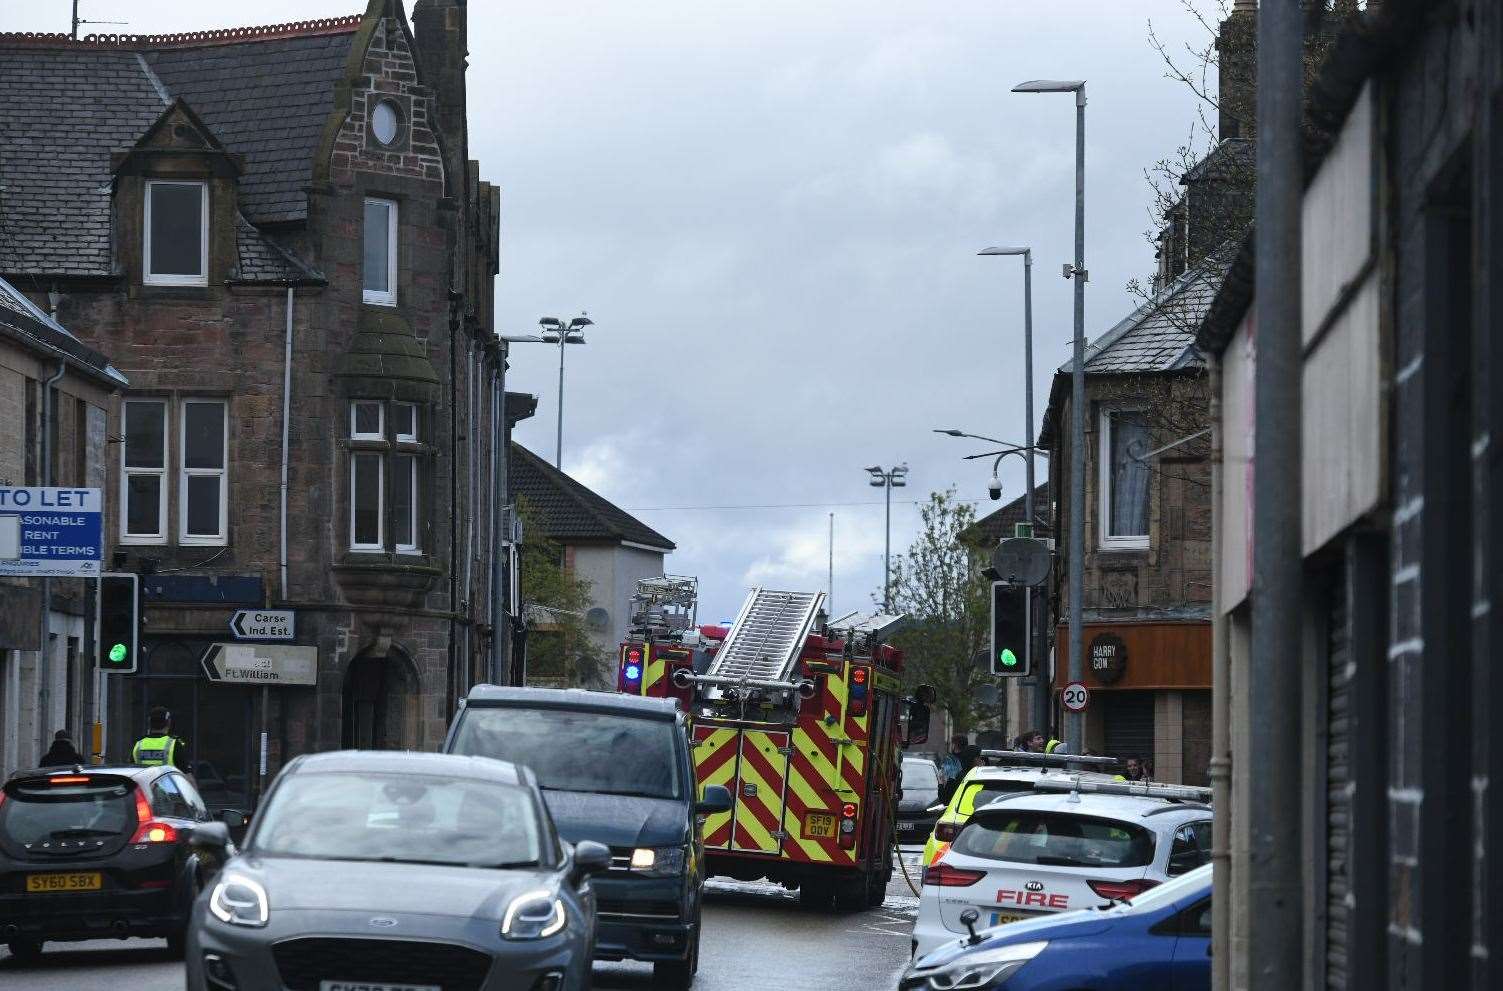 Grant Street with traffic and fire appliance in attendance. PICTURE: JAMES MACKENZIE